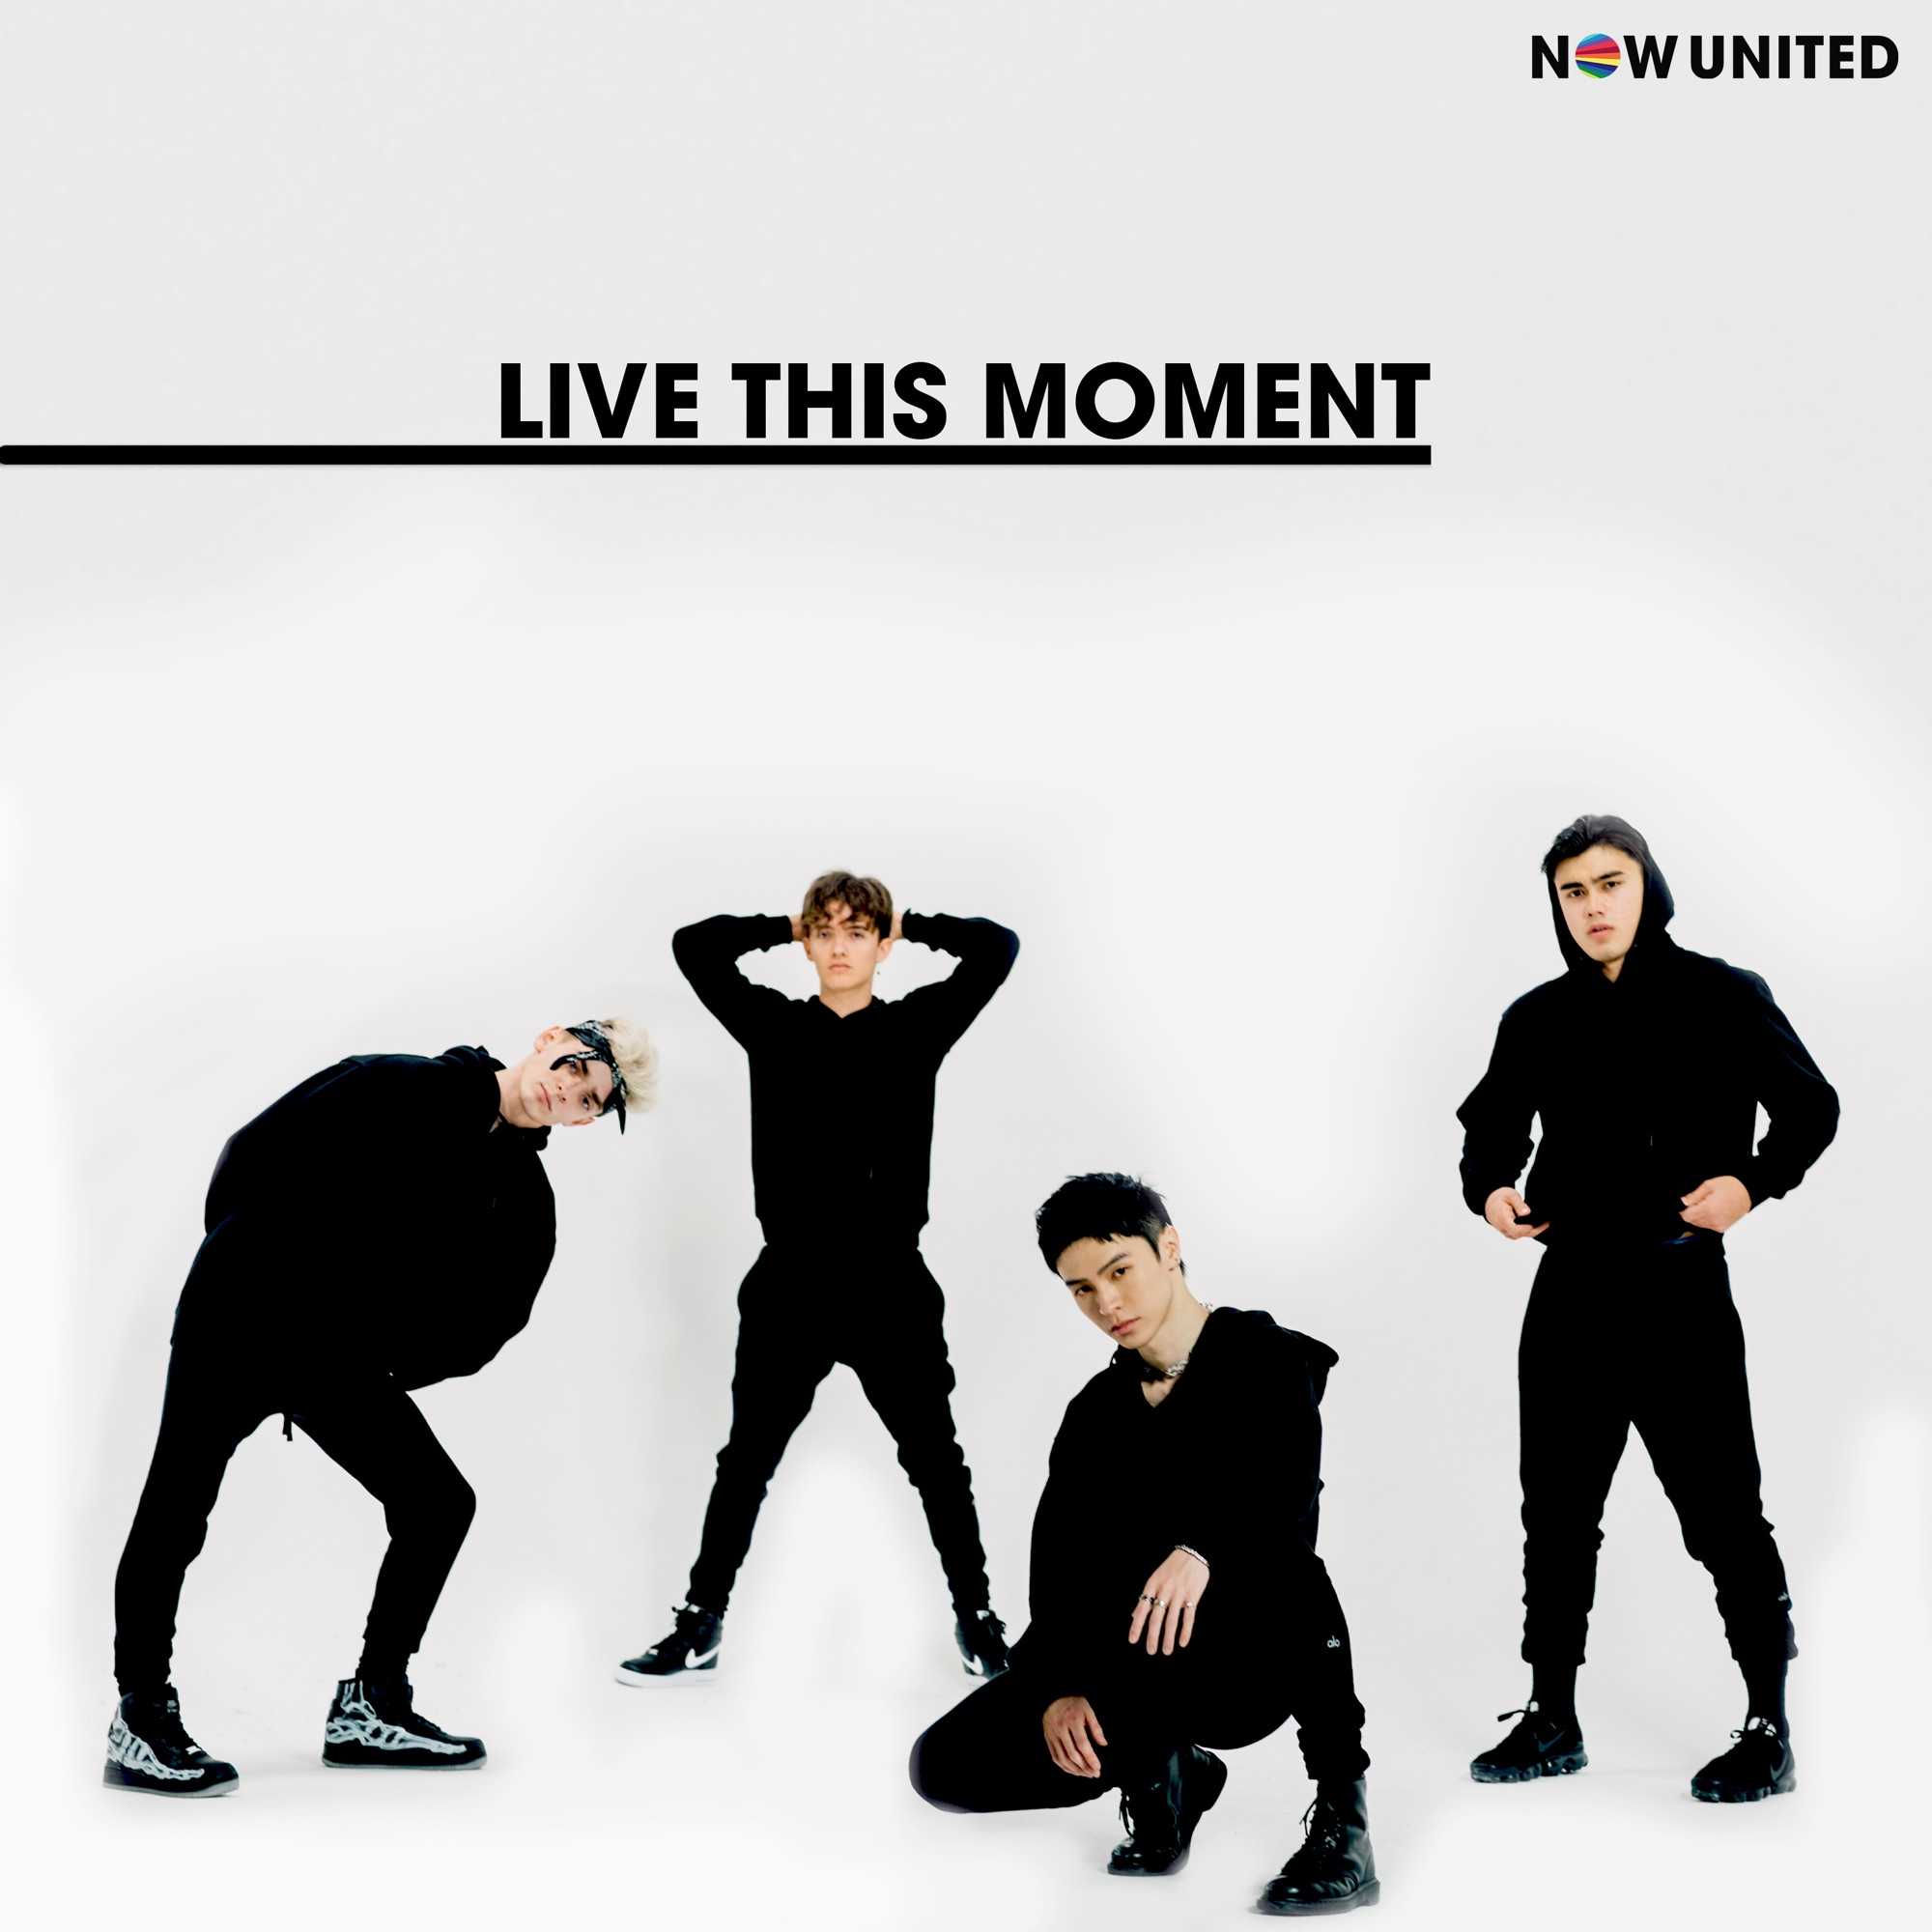 Now United - Live This Moment